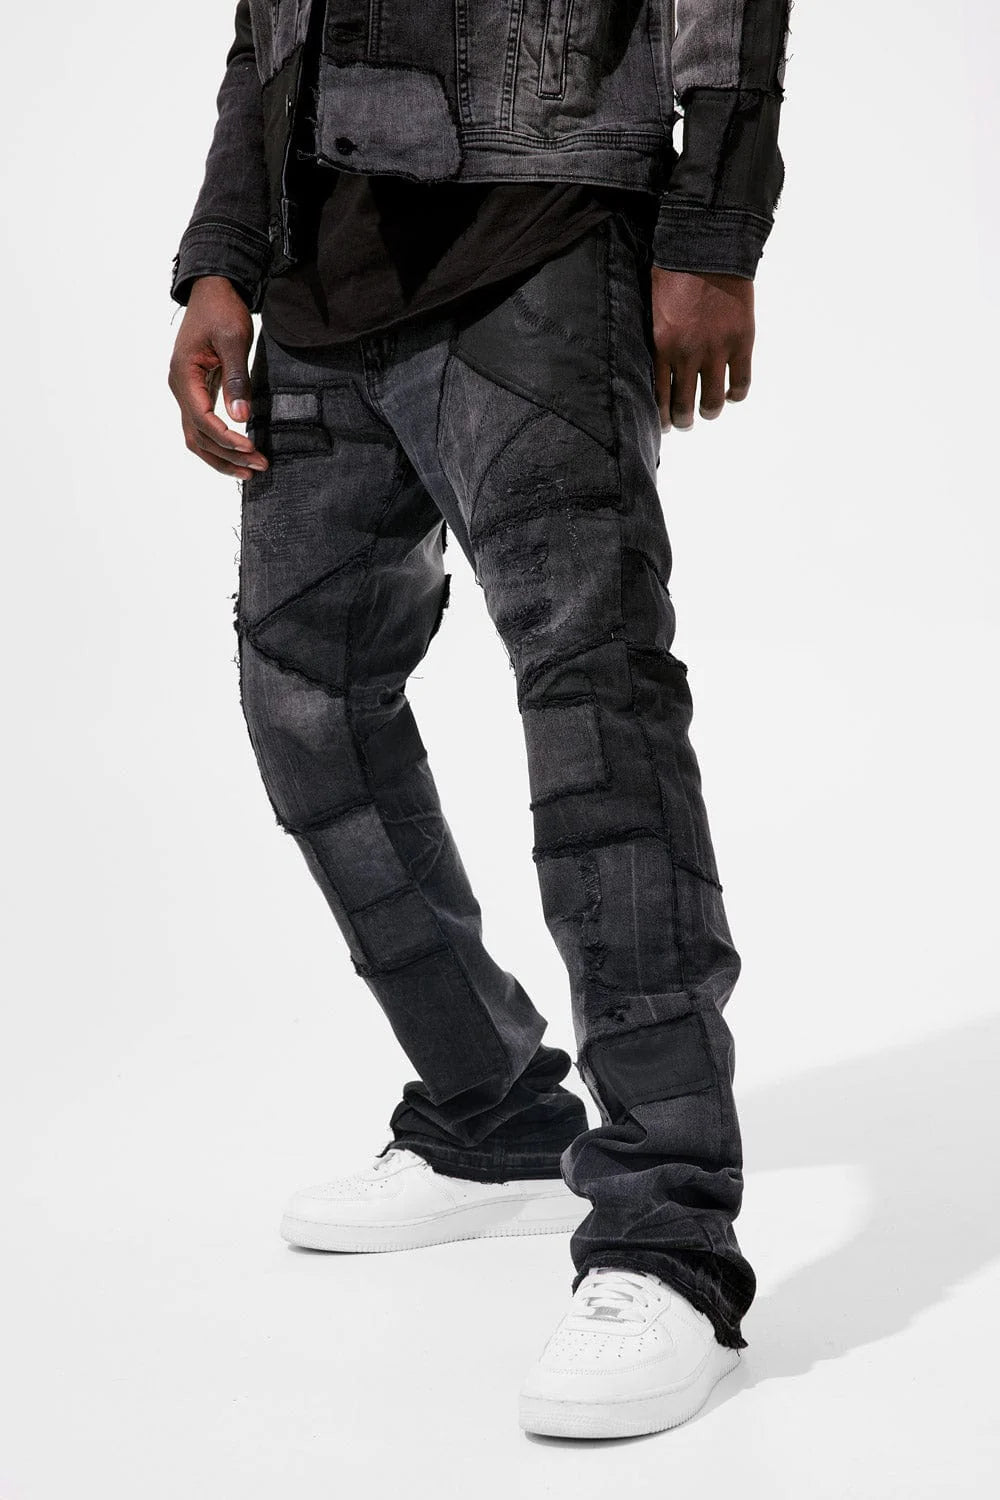 Ross Stacked - Lawless Denim -  Black Shadow - JRF1114